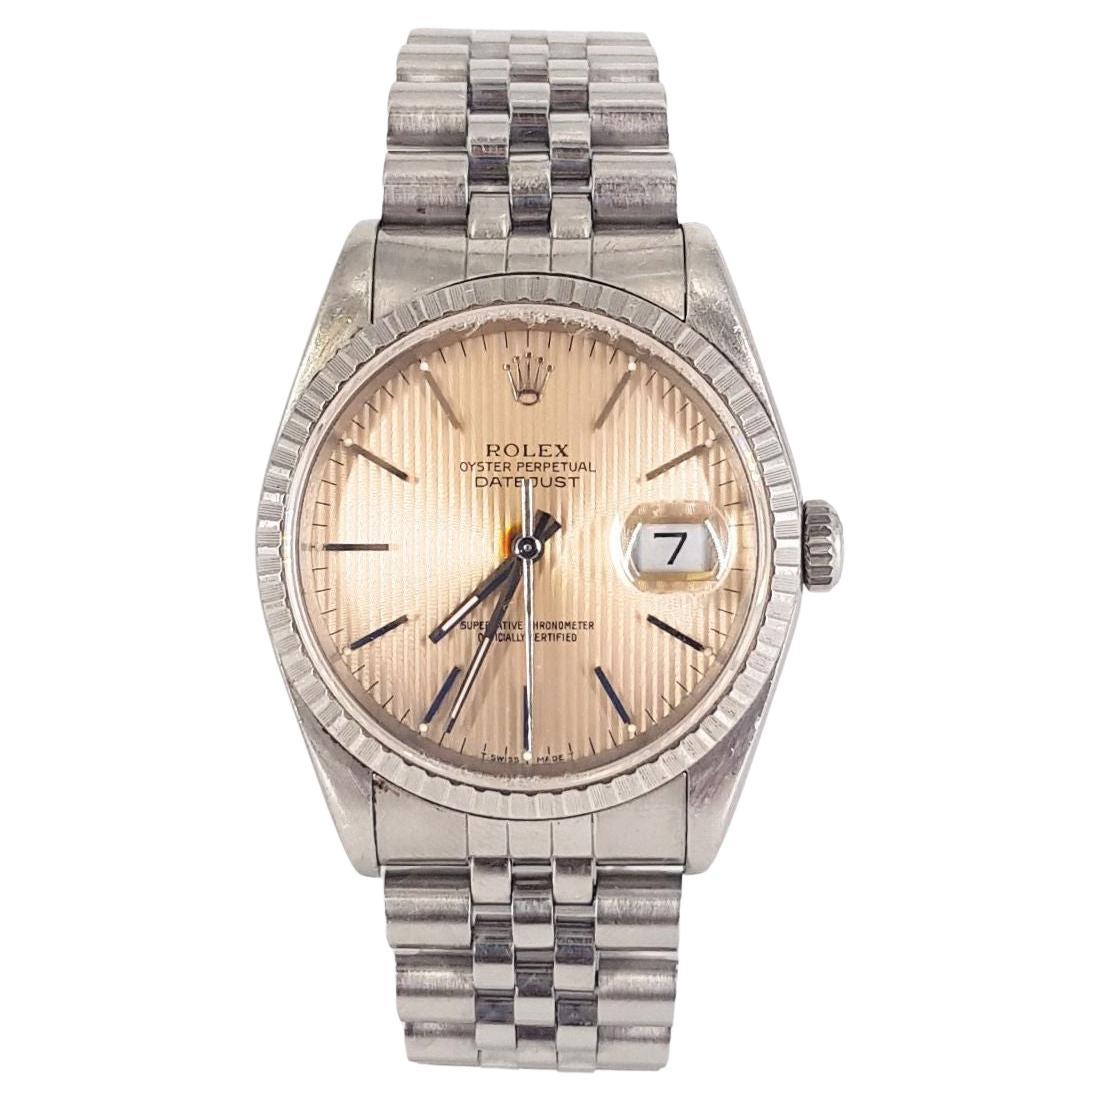 Rolex Oyster Perpetual Date Just 